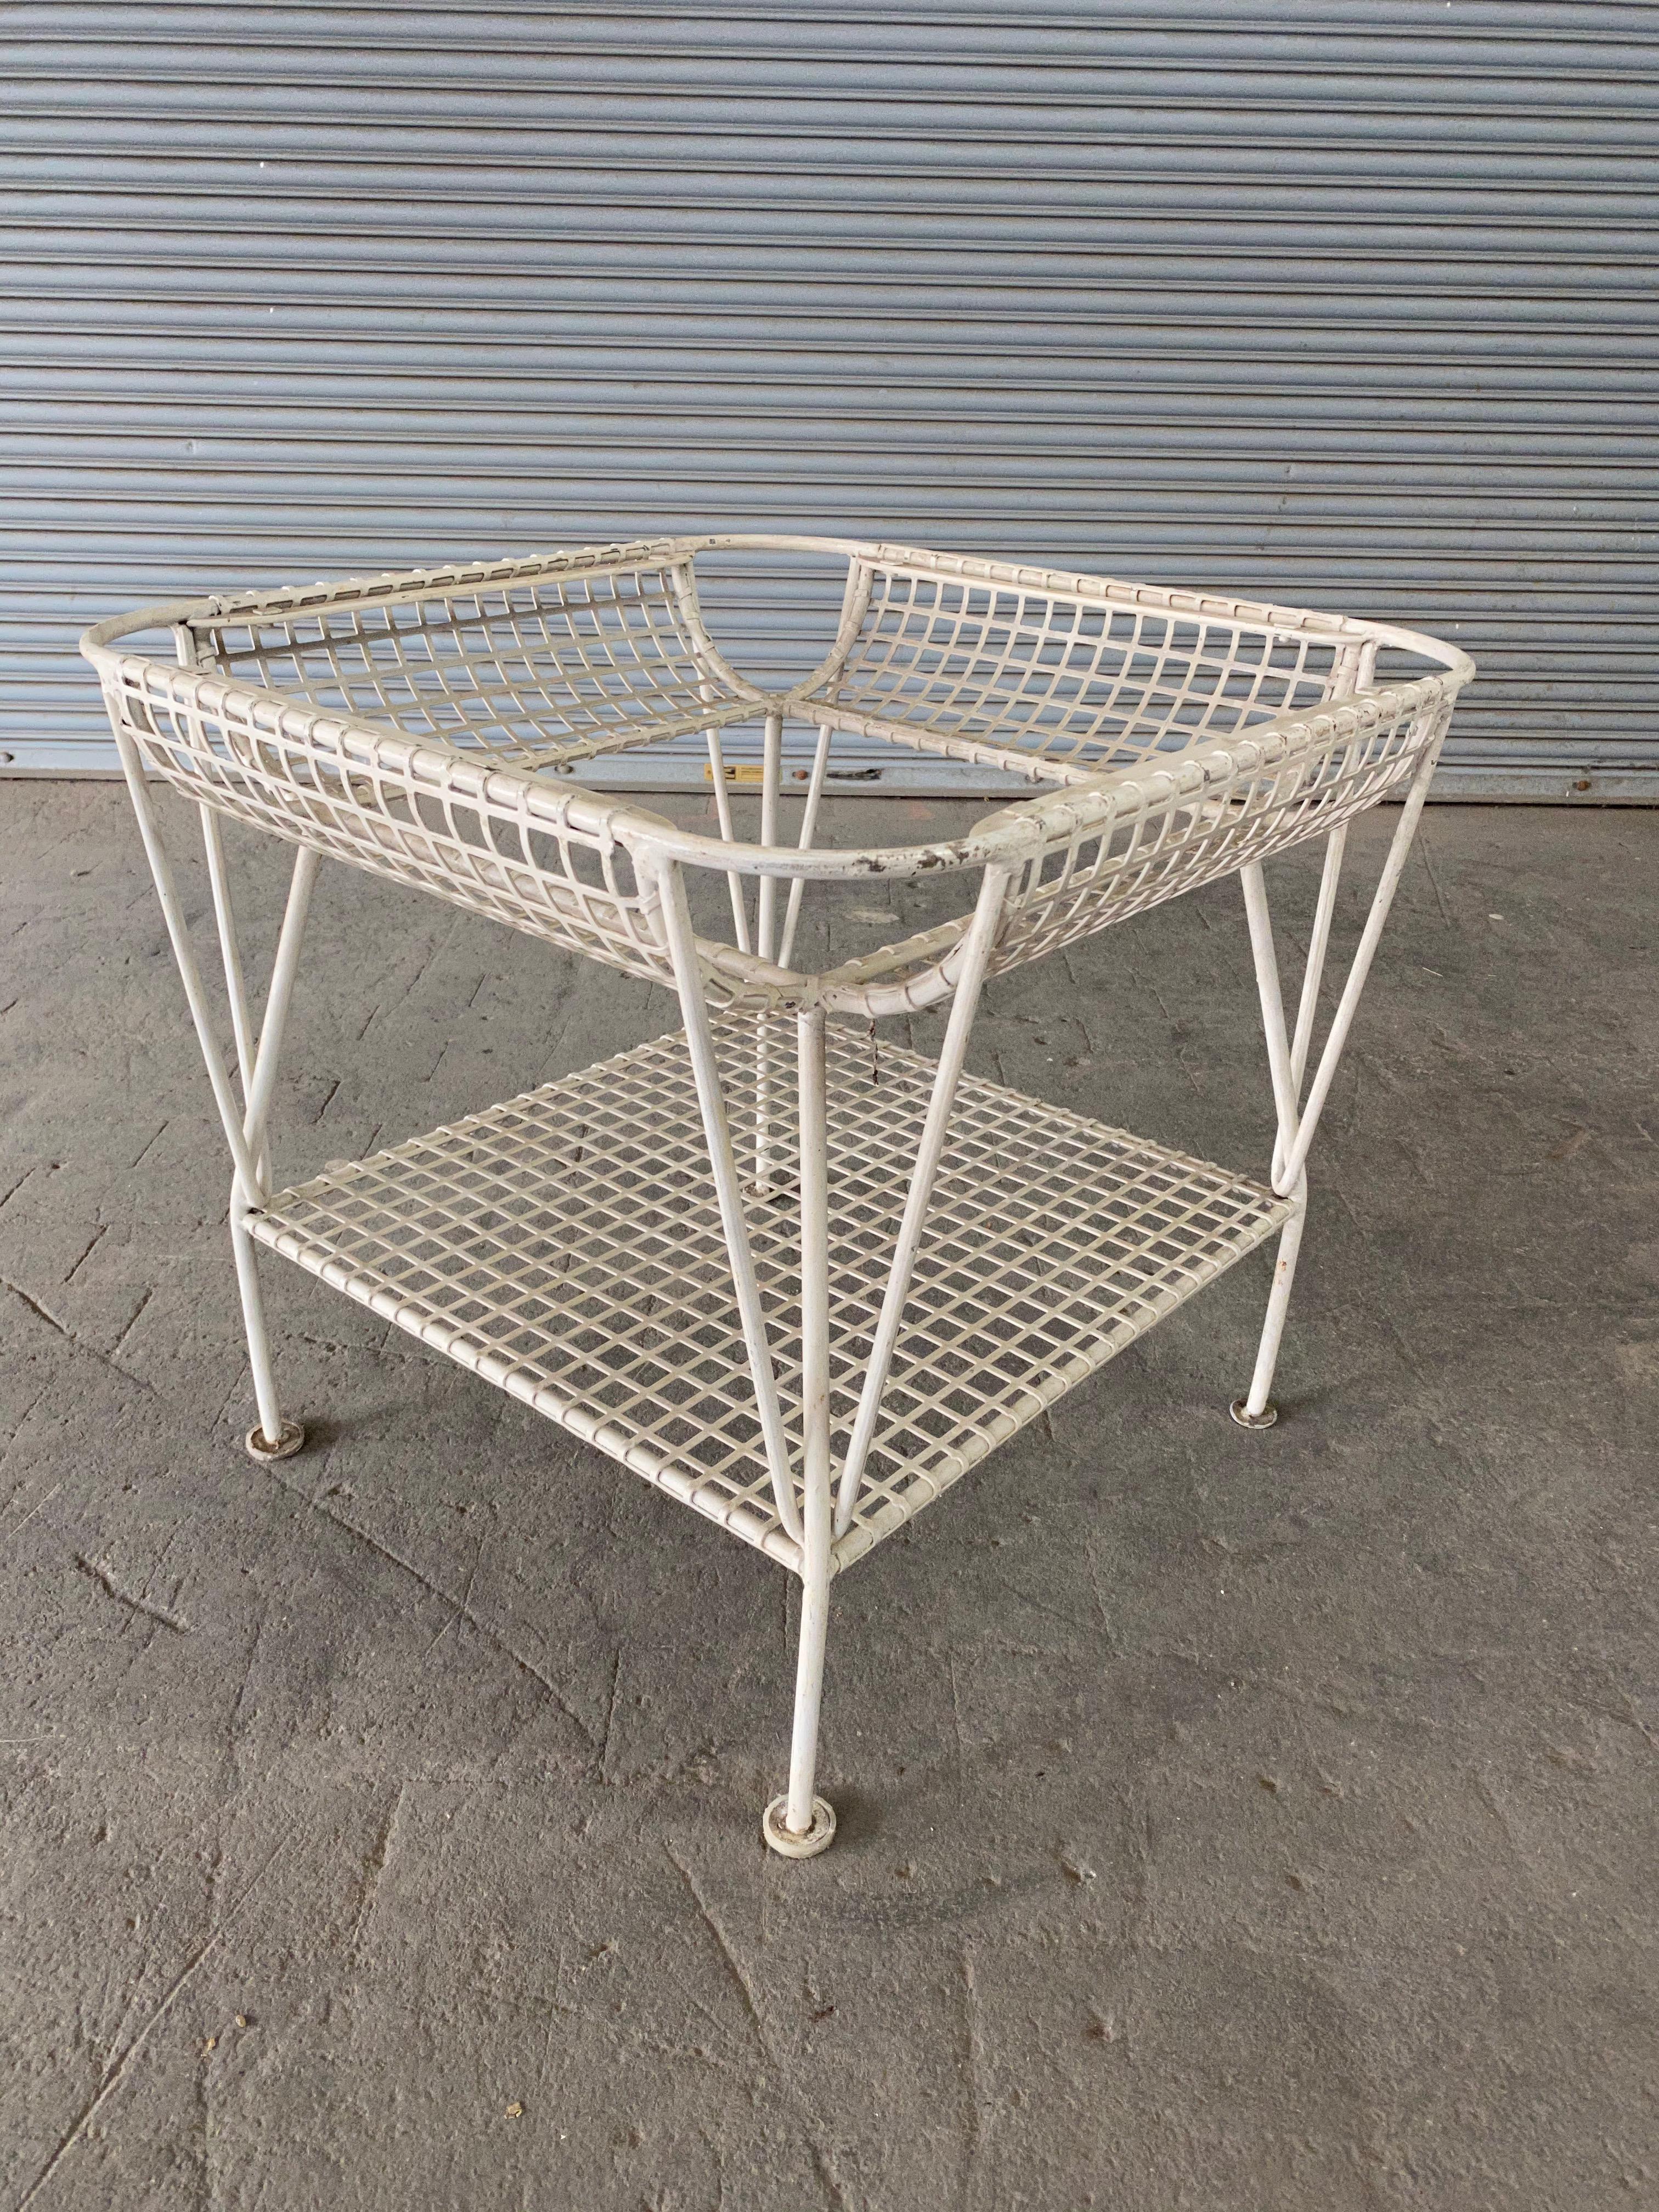 American Mid-Century white iron end table with glass top.  This table is part of a larger set that includes a 3 piece sectional settee, an armchair as well as a dining table and 4 chairs. All sold separately.

 